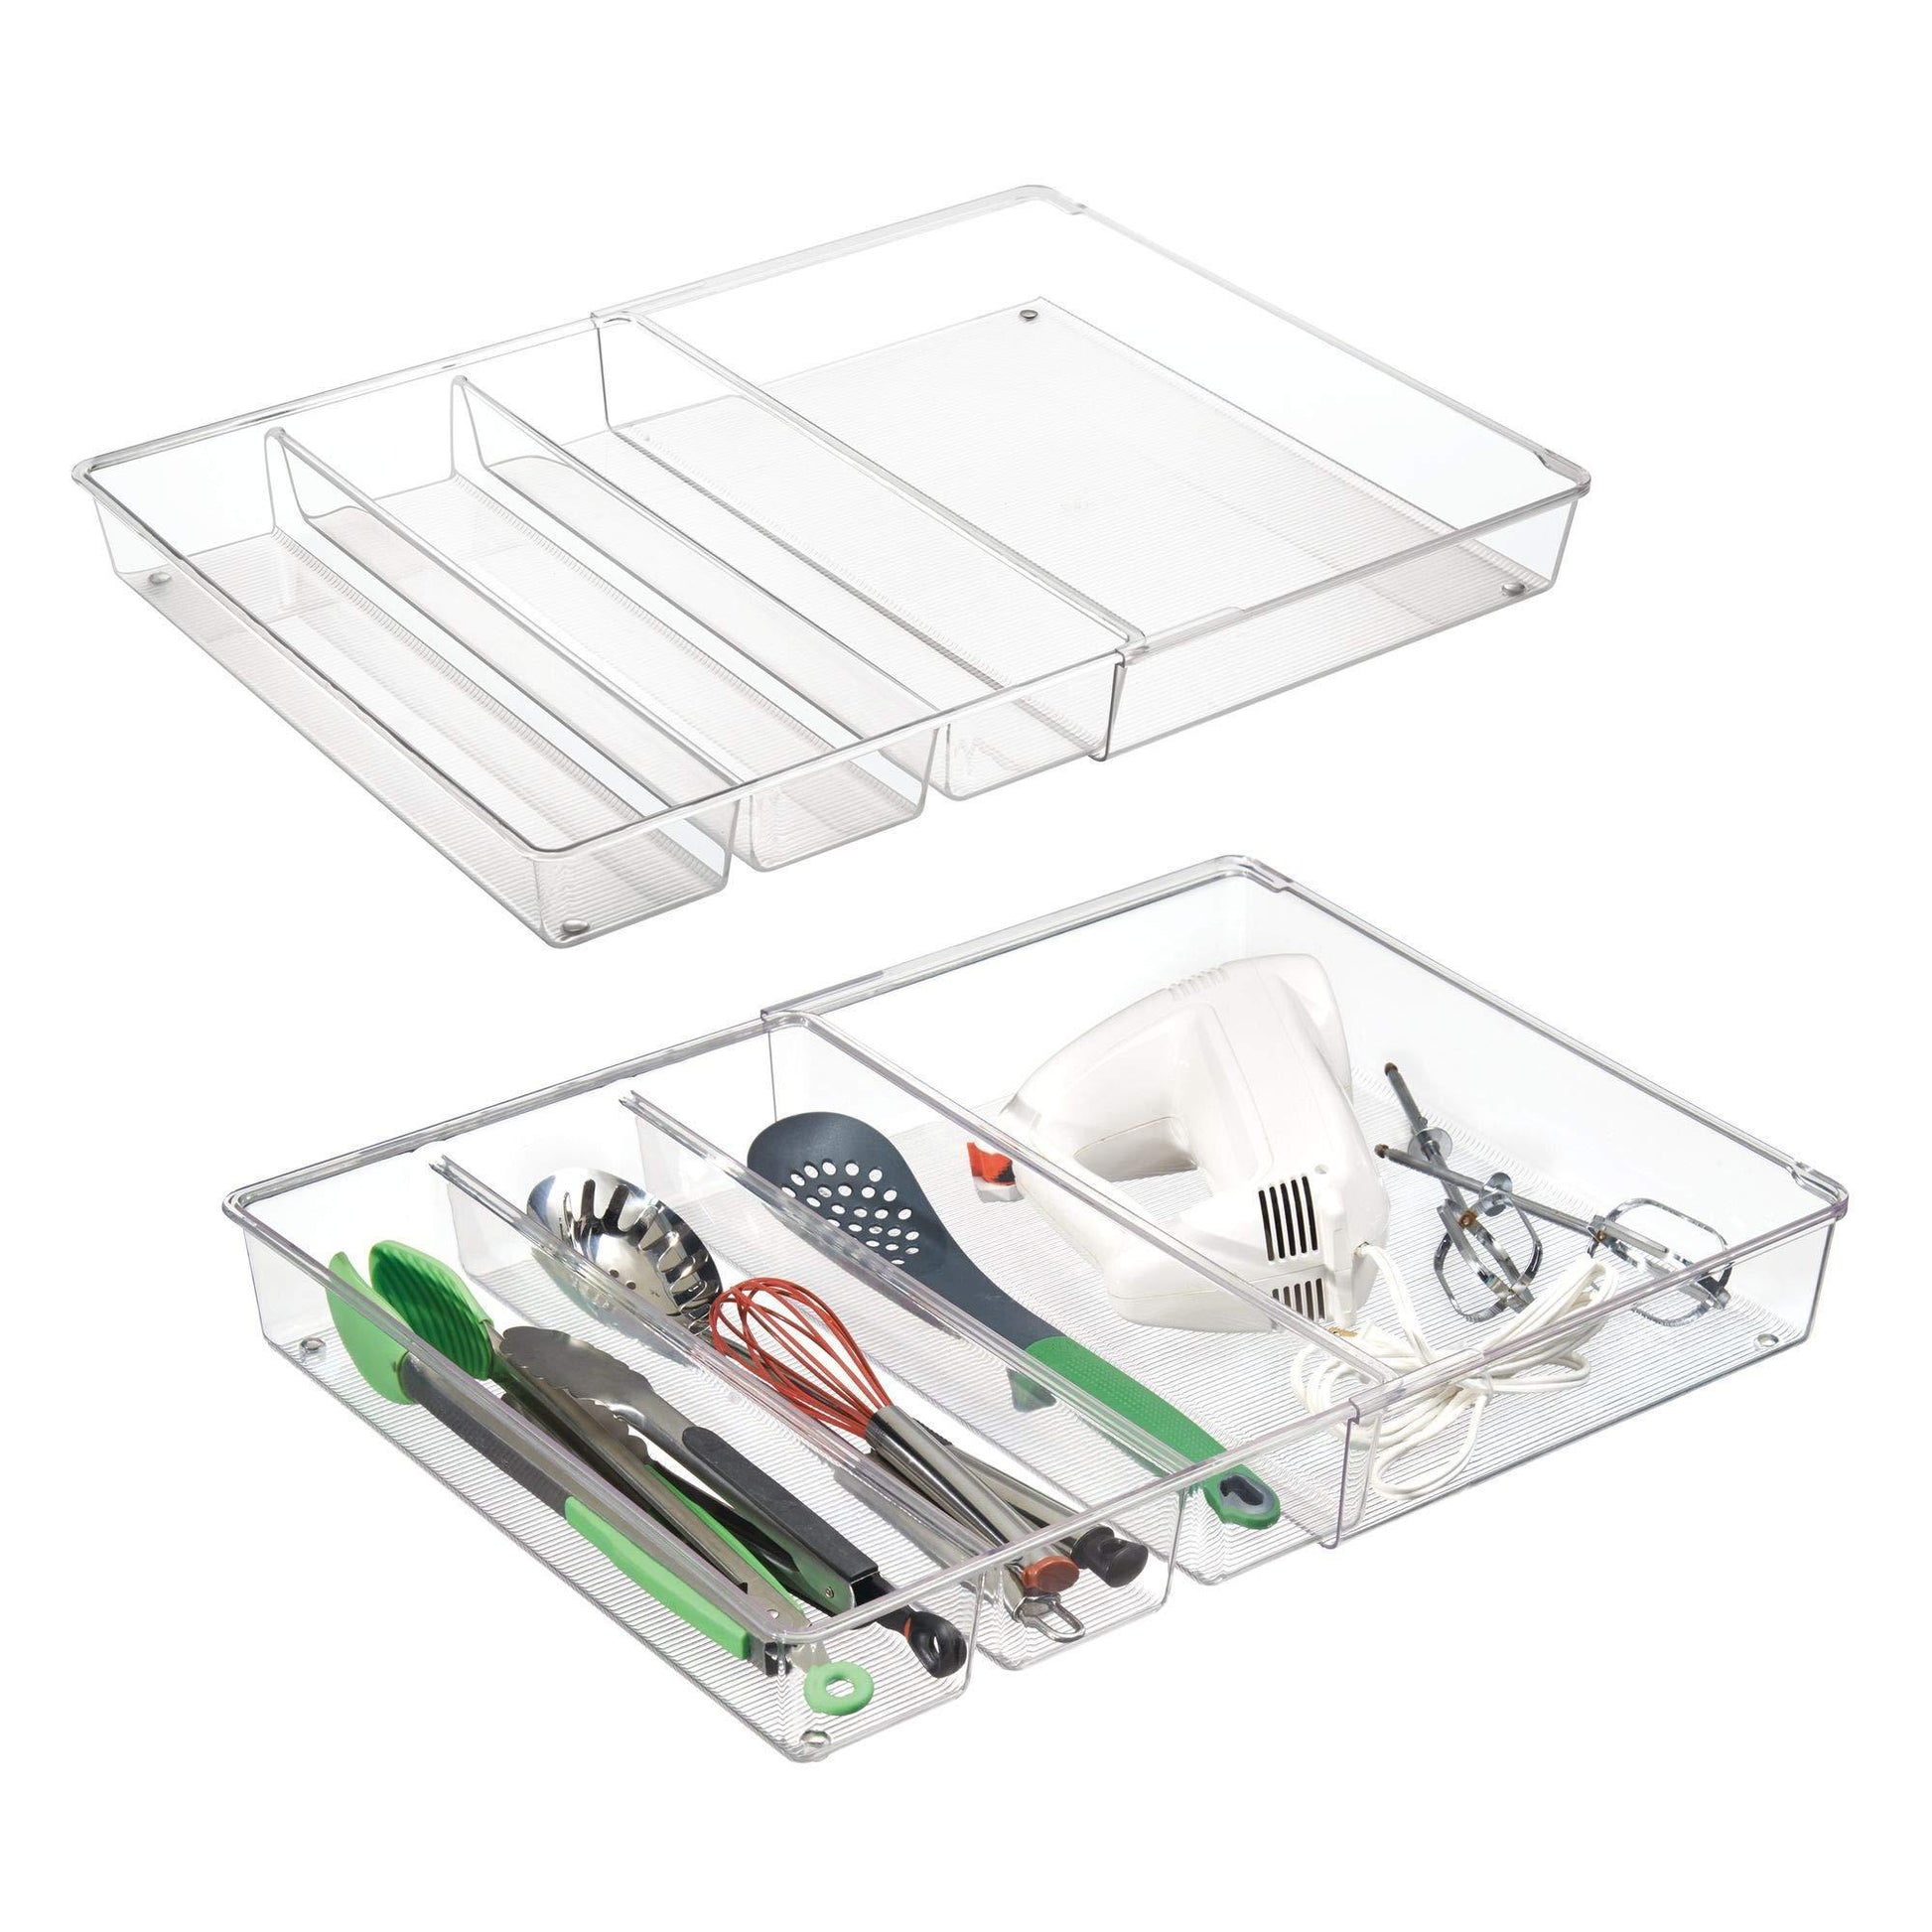 Top adjustable expandable 4 compartment kitchen cabinet drawer organizer tray divided sections for cutlery serving cooking utensils gadgets bpa free food safe 3 deep pack of 2 clear